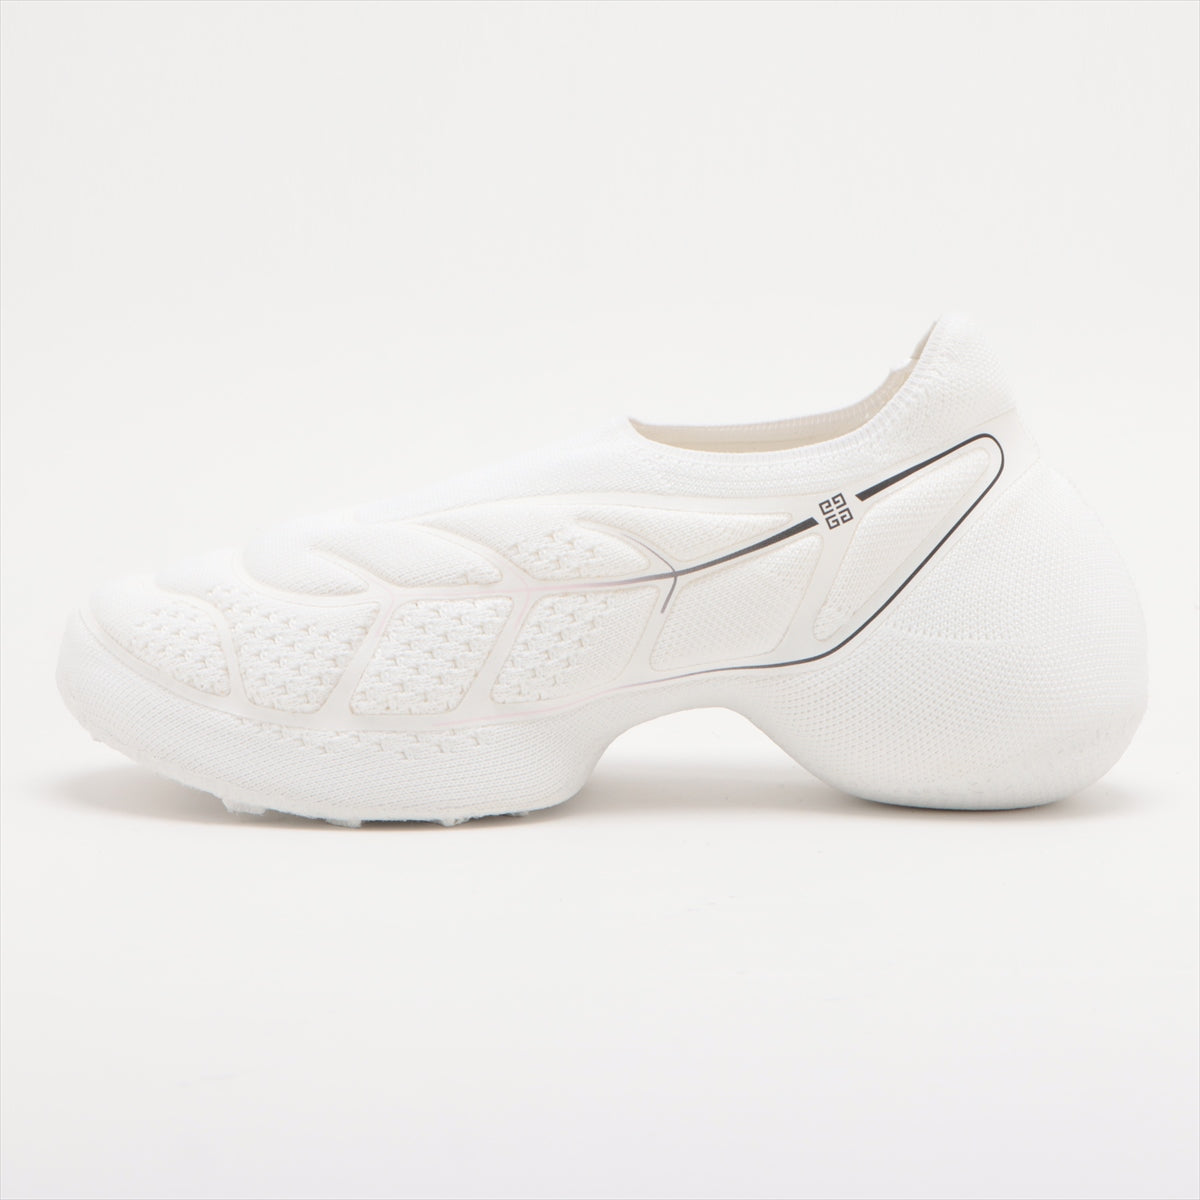 Givenchy Mesh Slip-on 37 Ladies' White BE002WE1JK TK-360 Mesh Low-top Sneakers There is a box